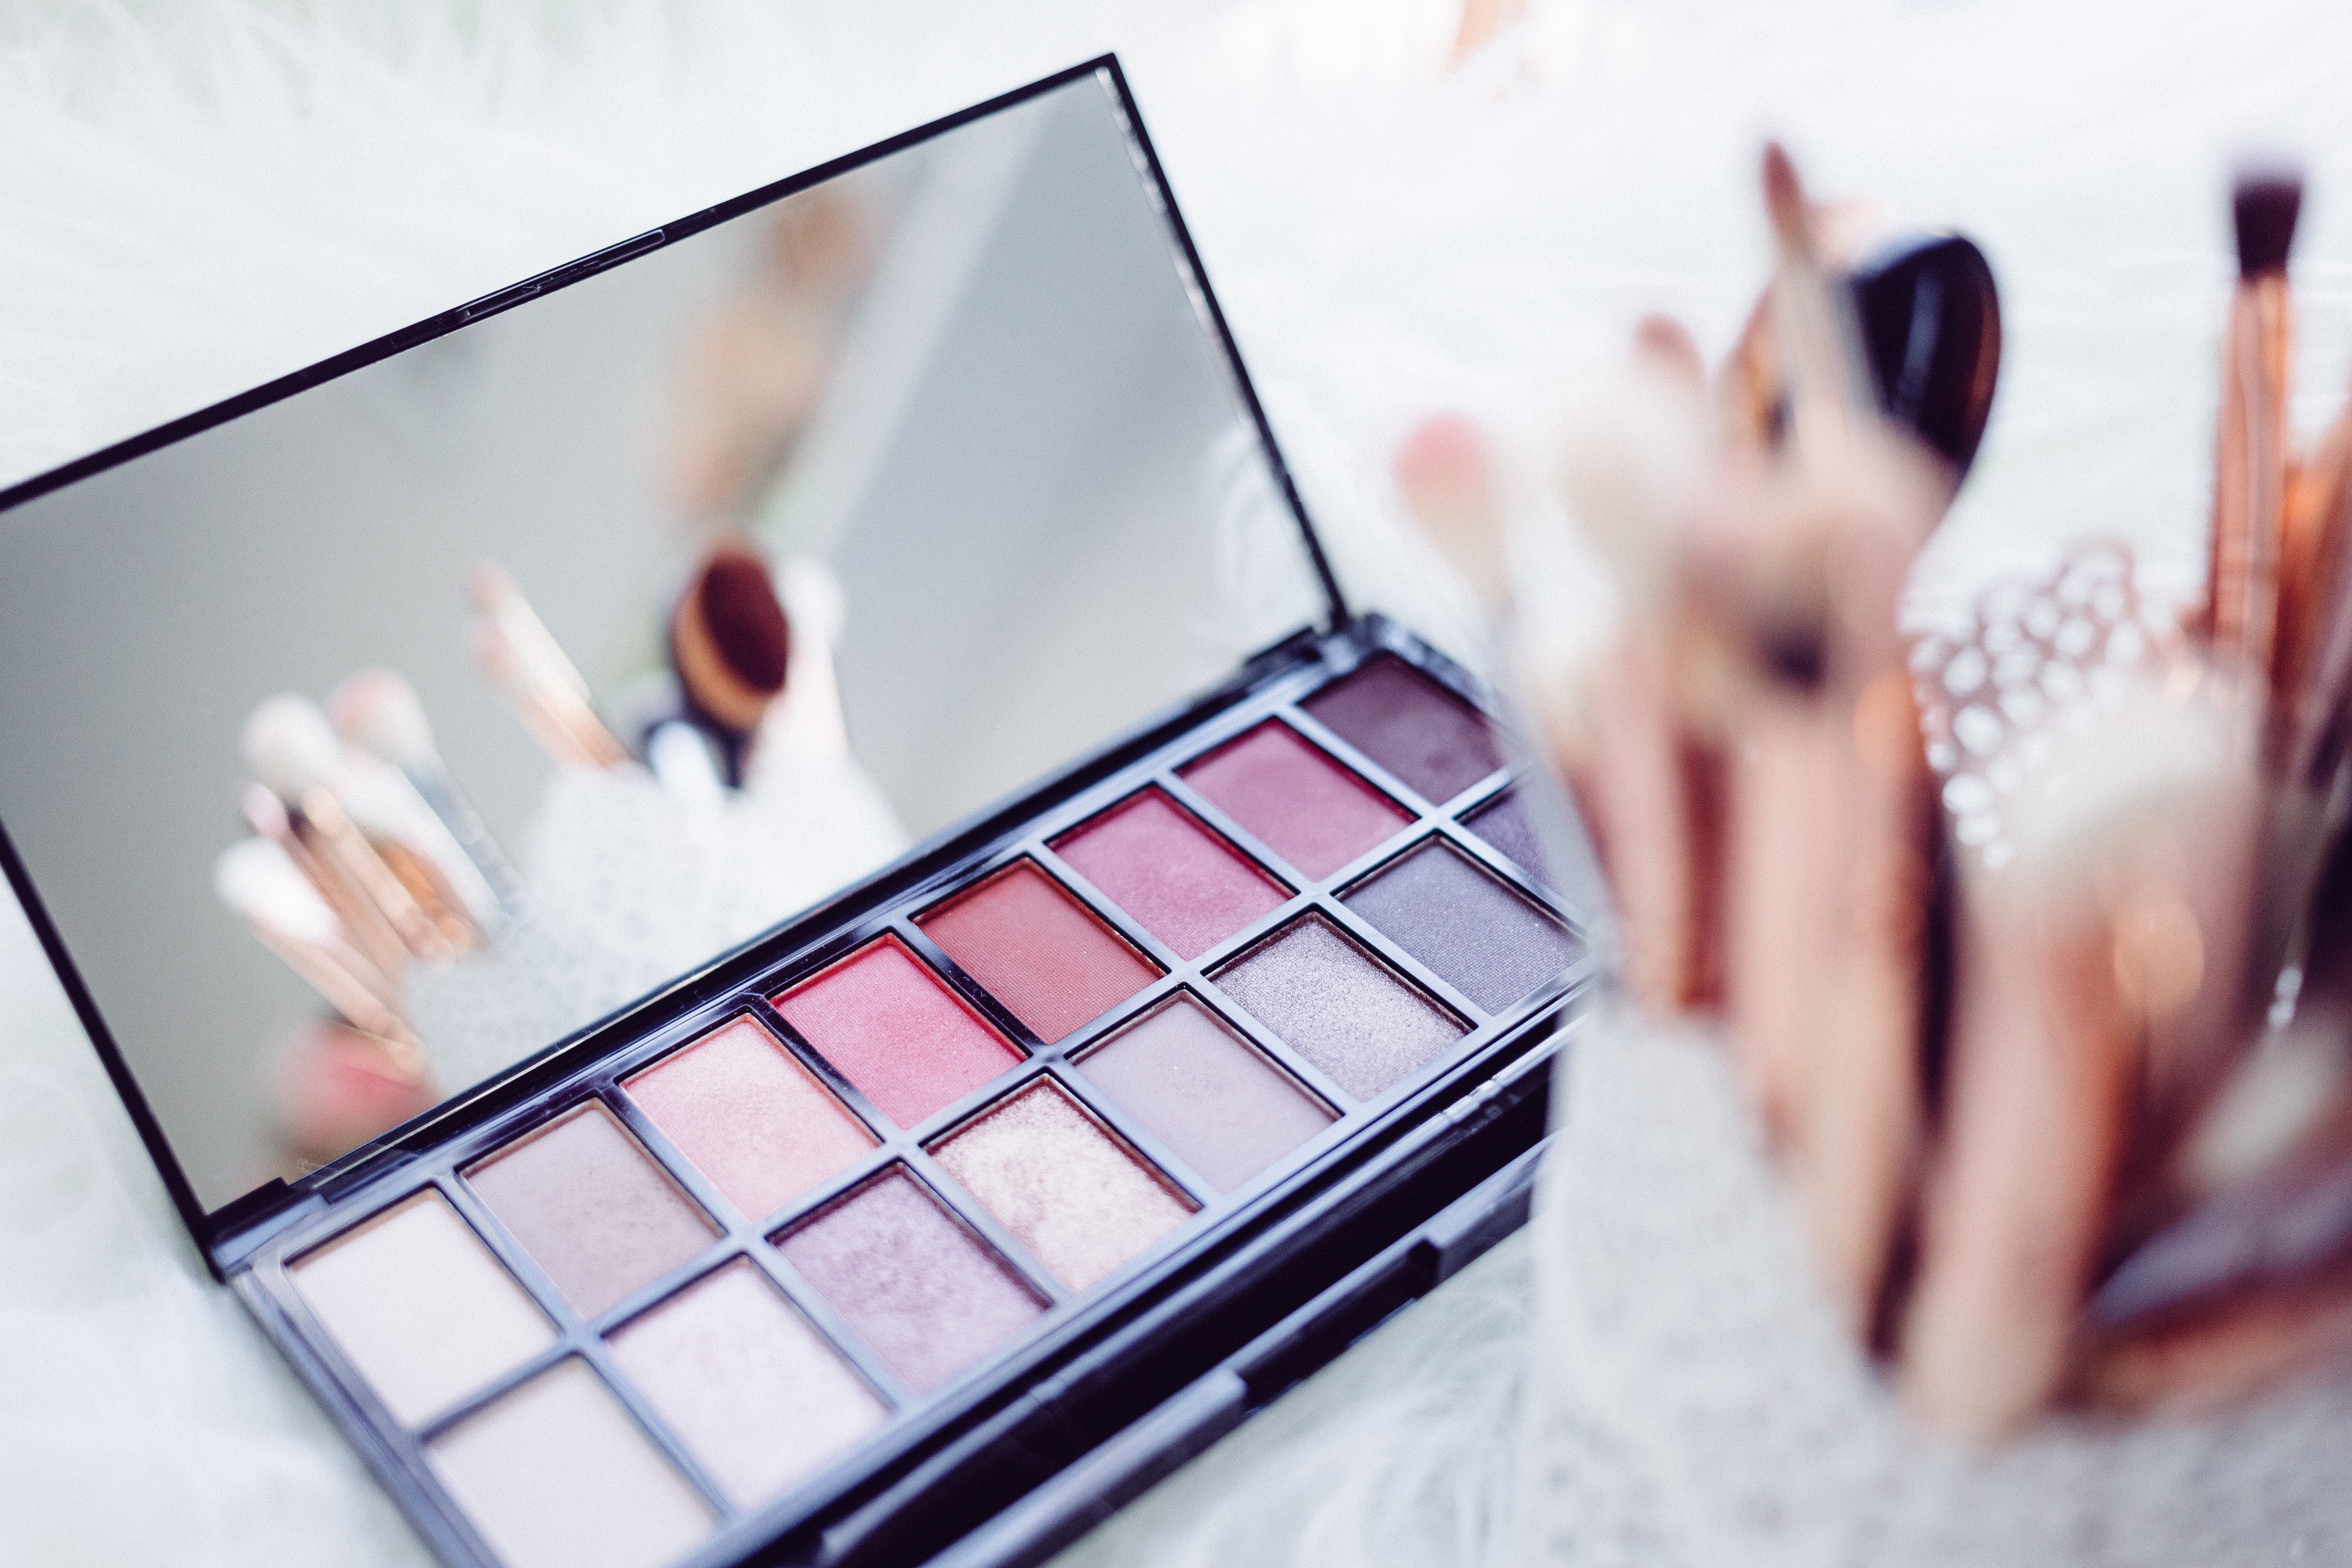 Find Hair And Makeup Artists in   Clovelly Park Get the best prices from 2,000+ of the most reviewed Hair And Makeup Artists  near Clovelly Park. Pick from mobile stylists or salons.